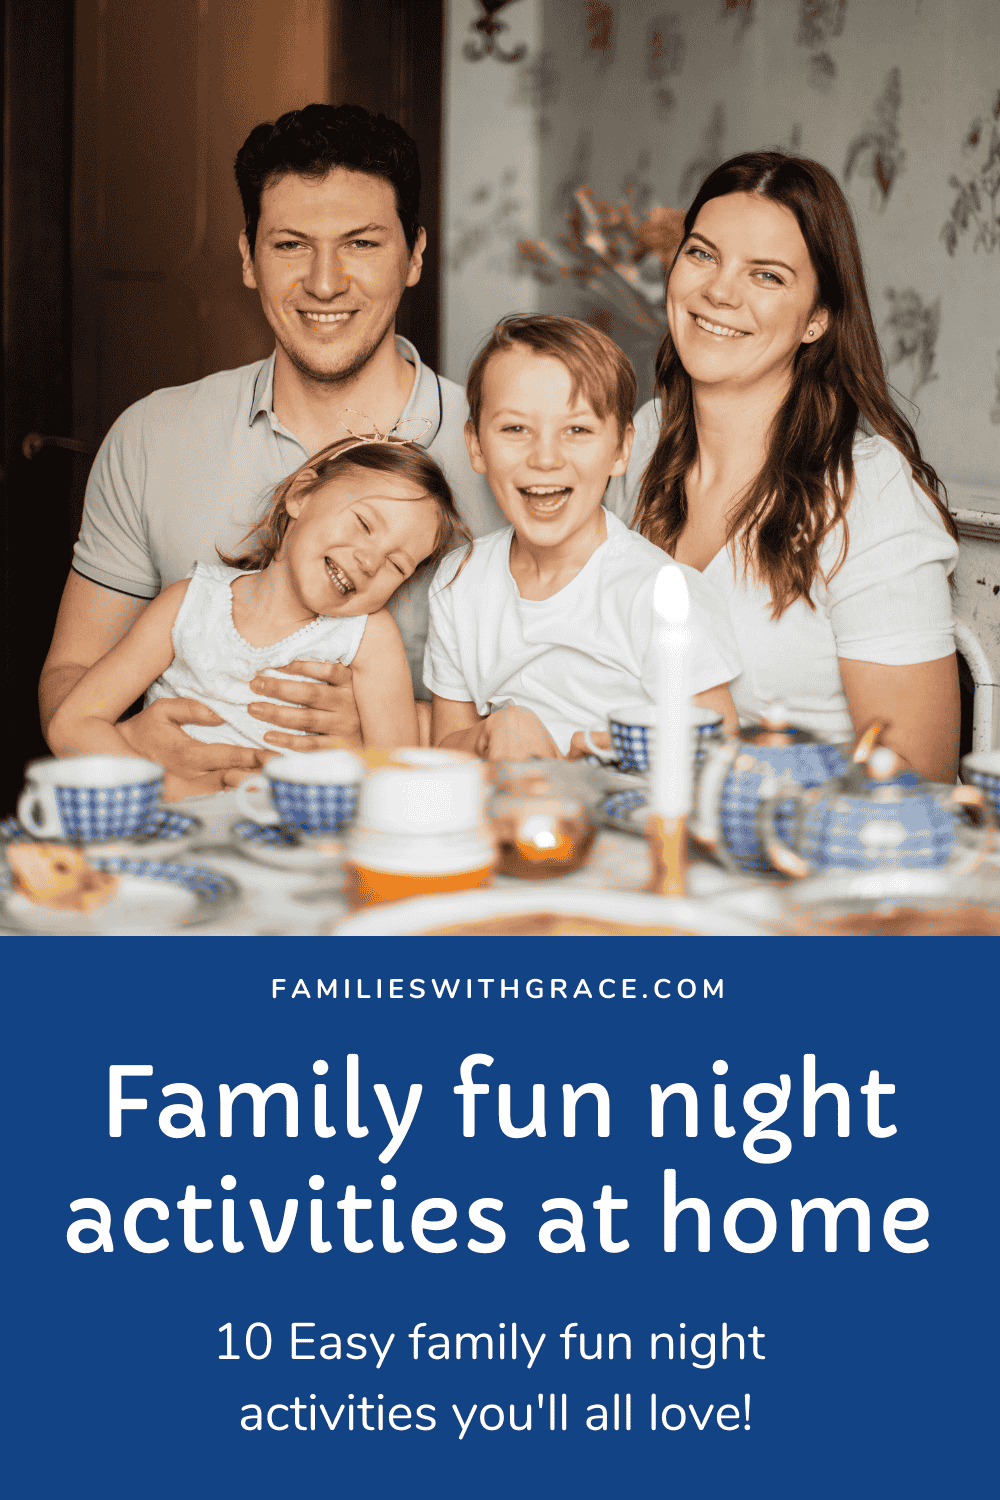 Family fun night activities at home